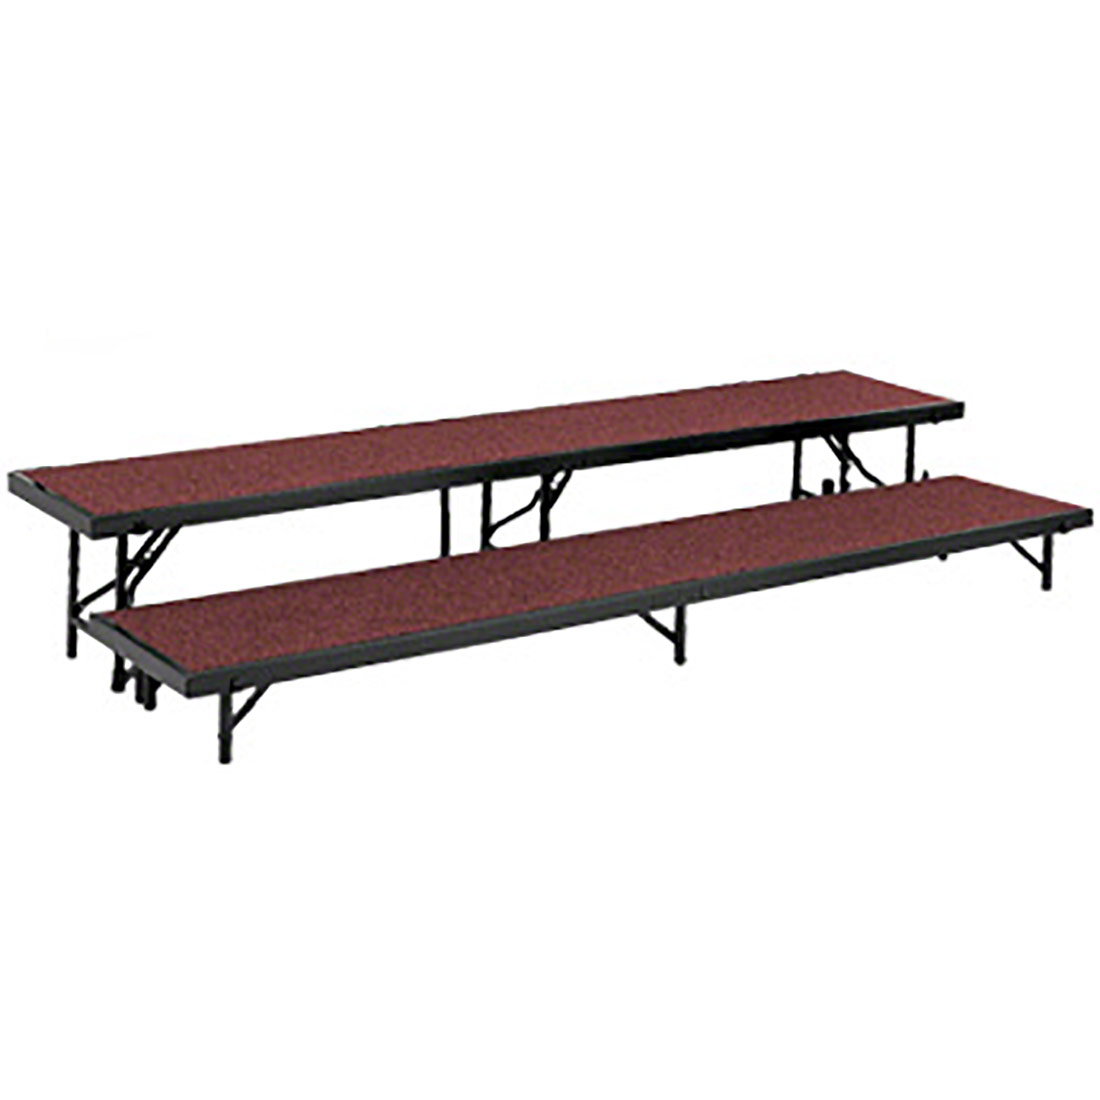 Rt2lc-40 2 Level Tapered Standing Choral Riser, Red Carpet - 18 X 96 In. Platform